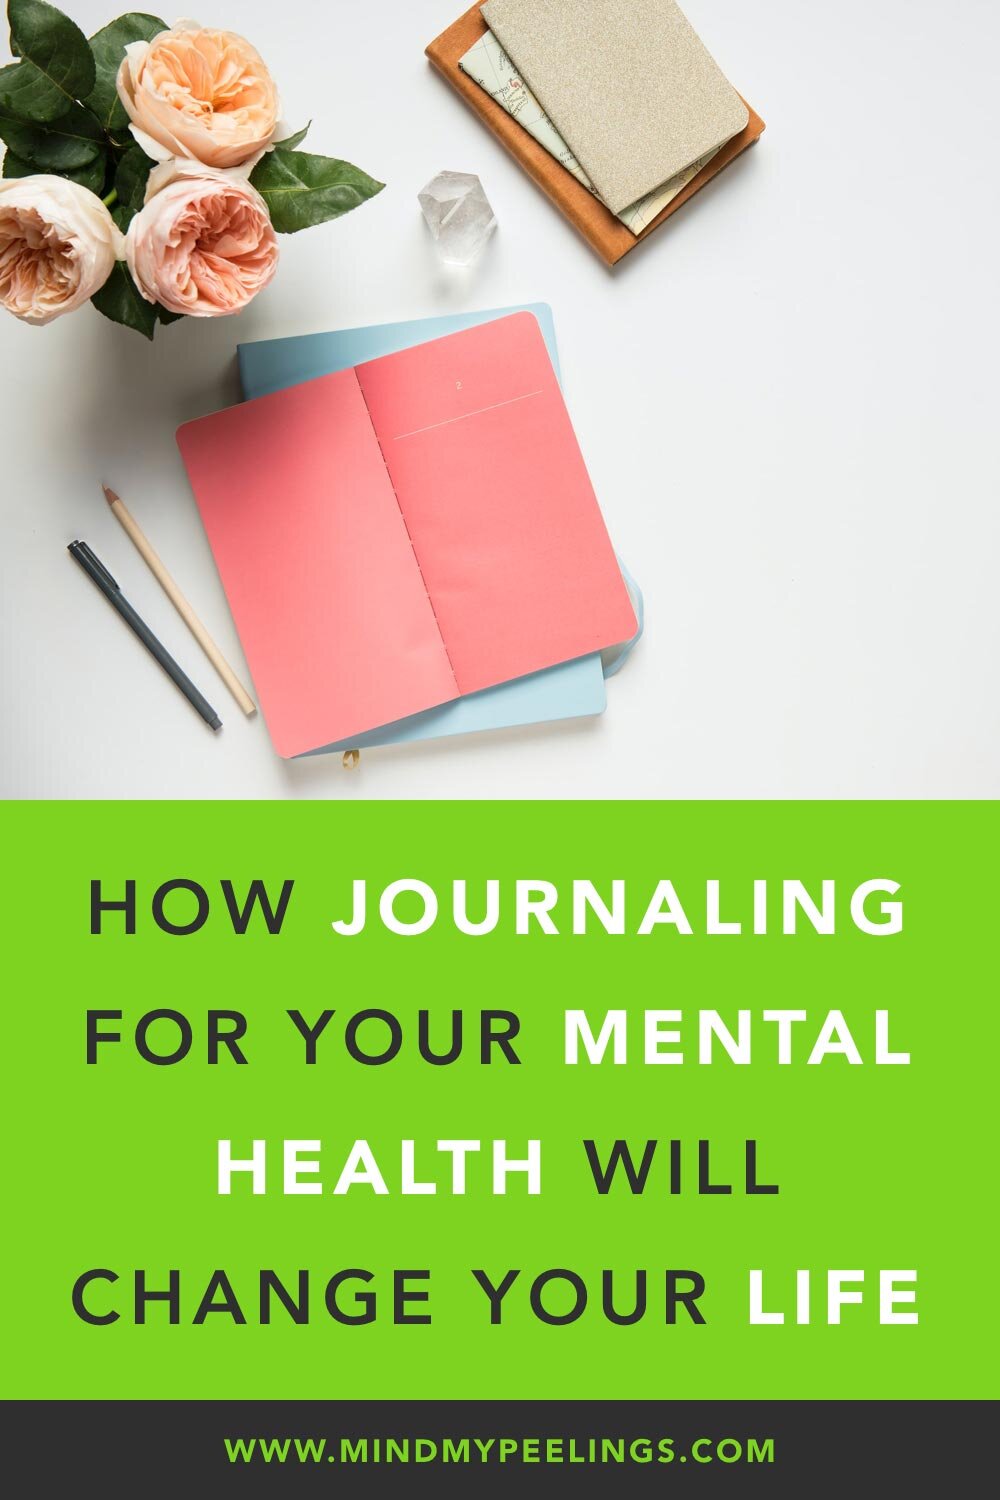 Why Every Woman Needs to Keep a Self-Discovery Journal: 7 Powerful Benefits  to Journaling - Transformation Life Coach